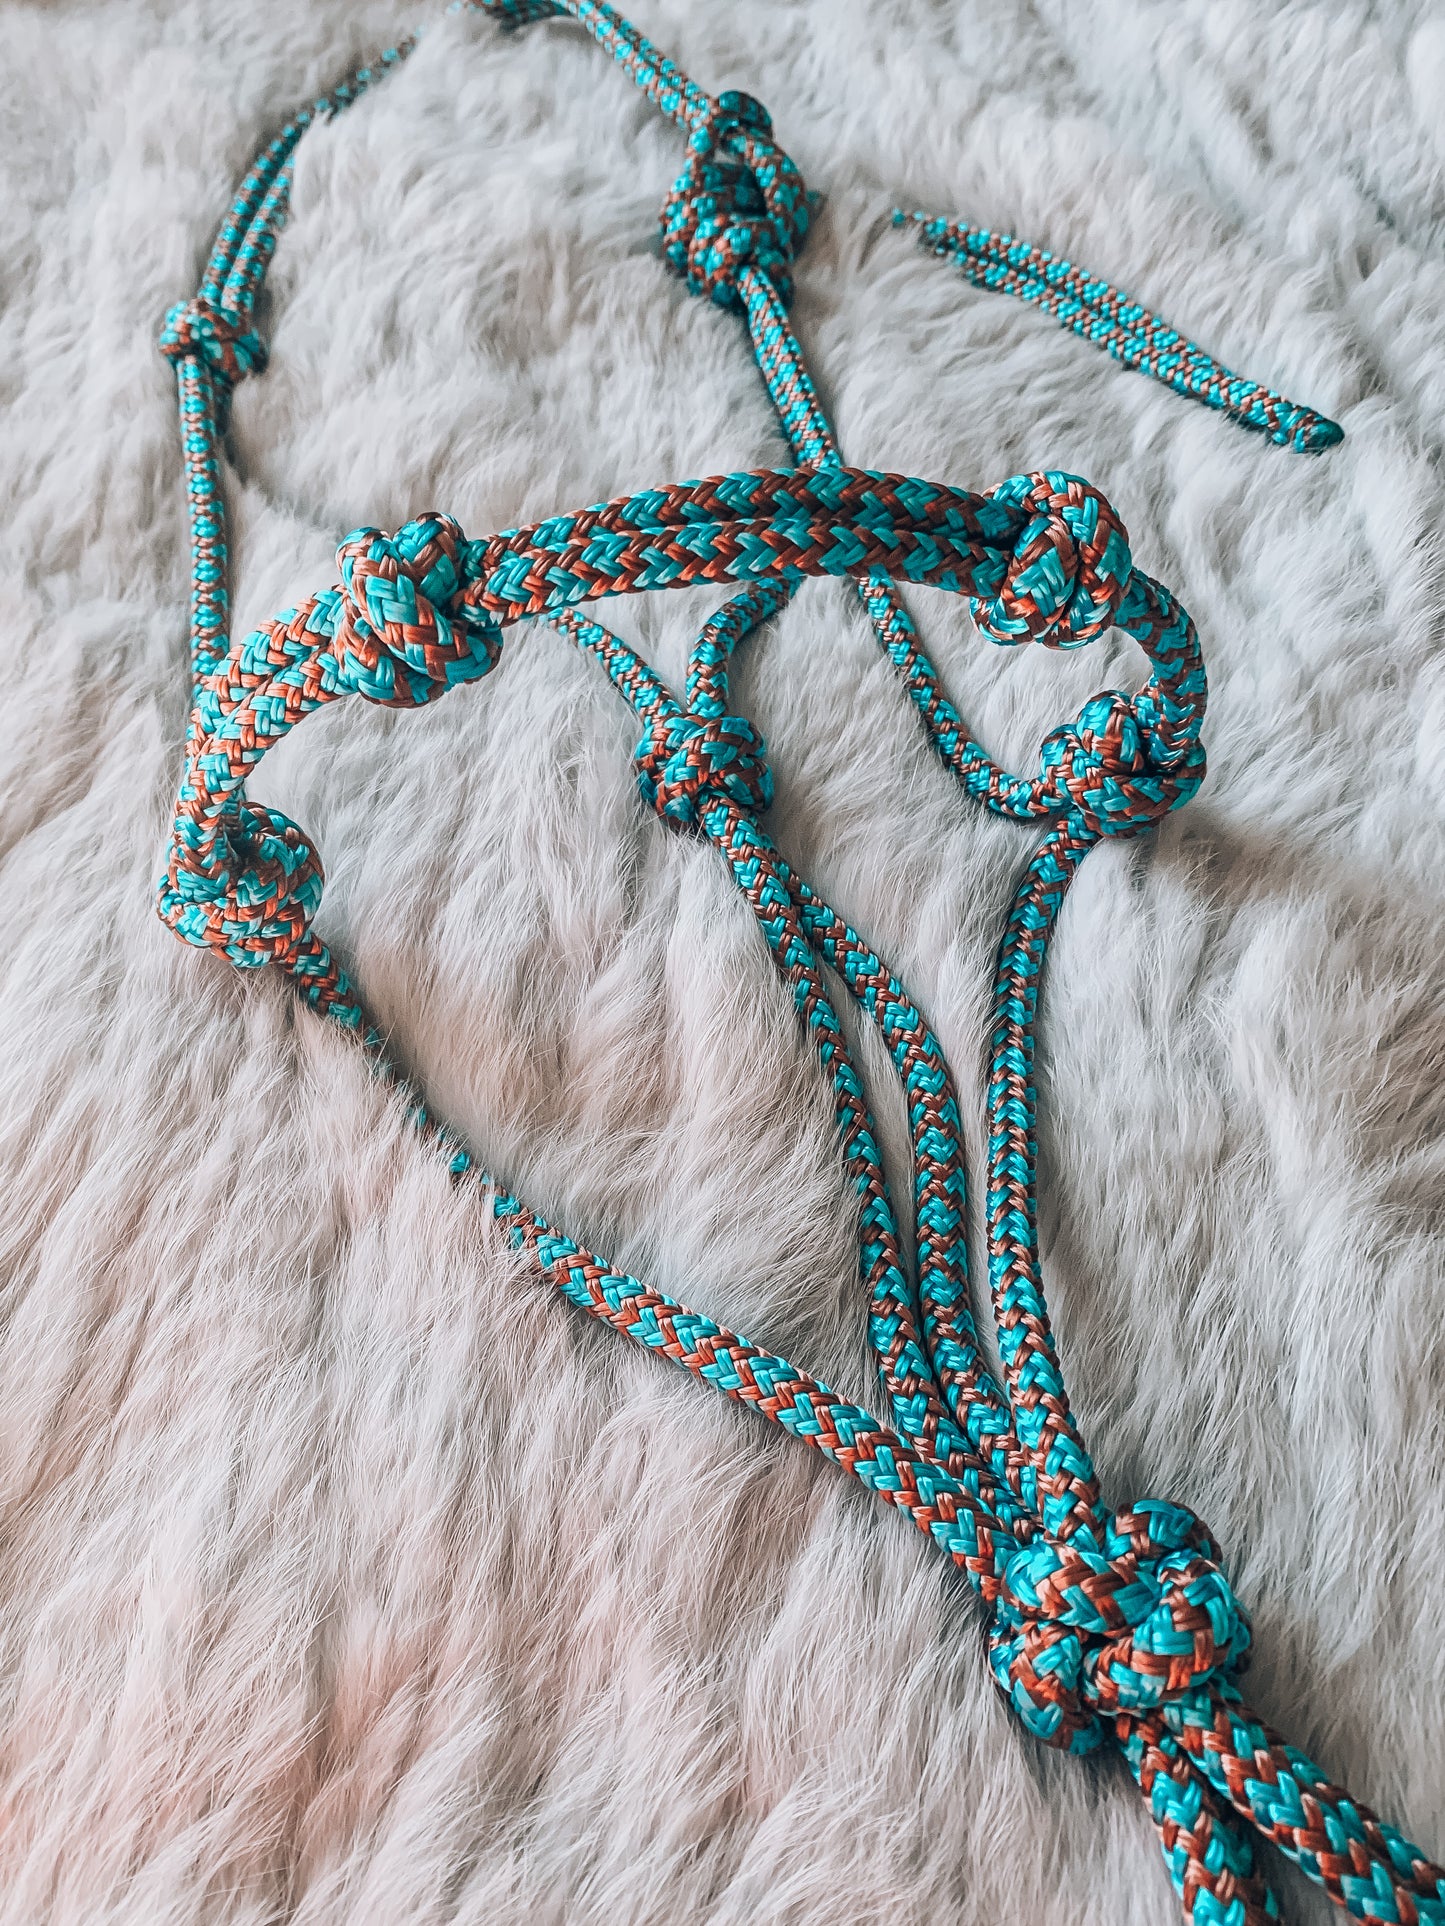 Navaho - Western Rope Halter Without Nose Knots - National